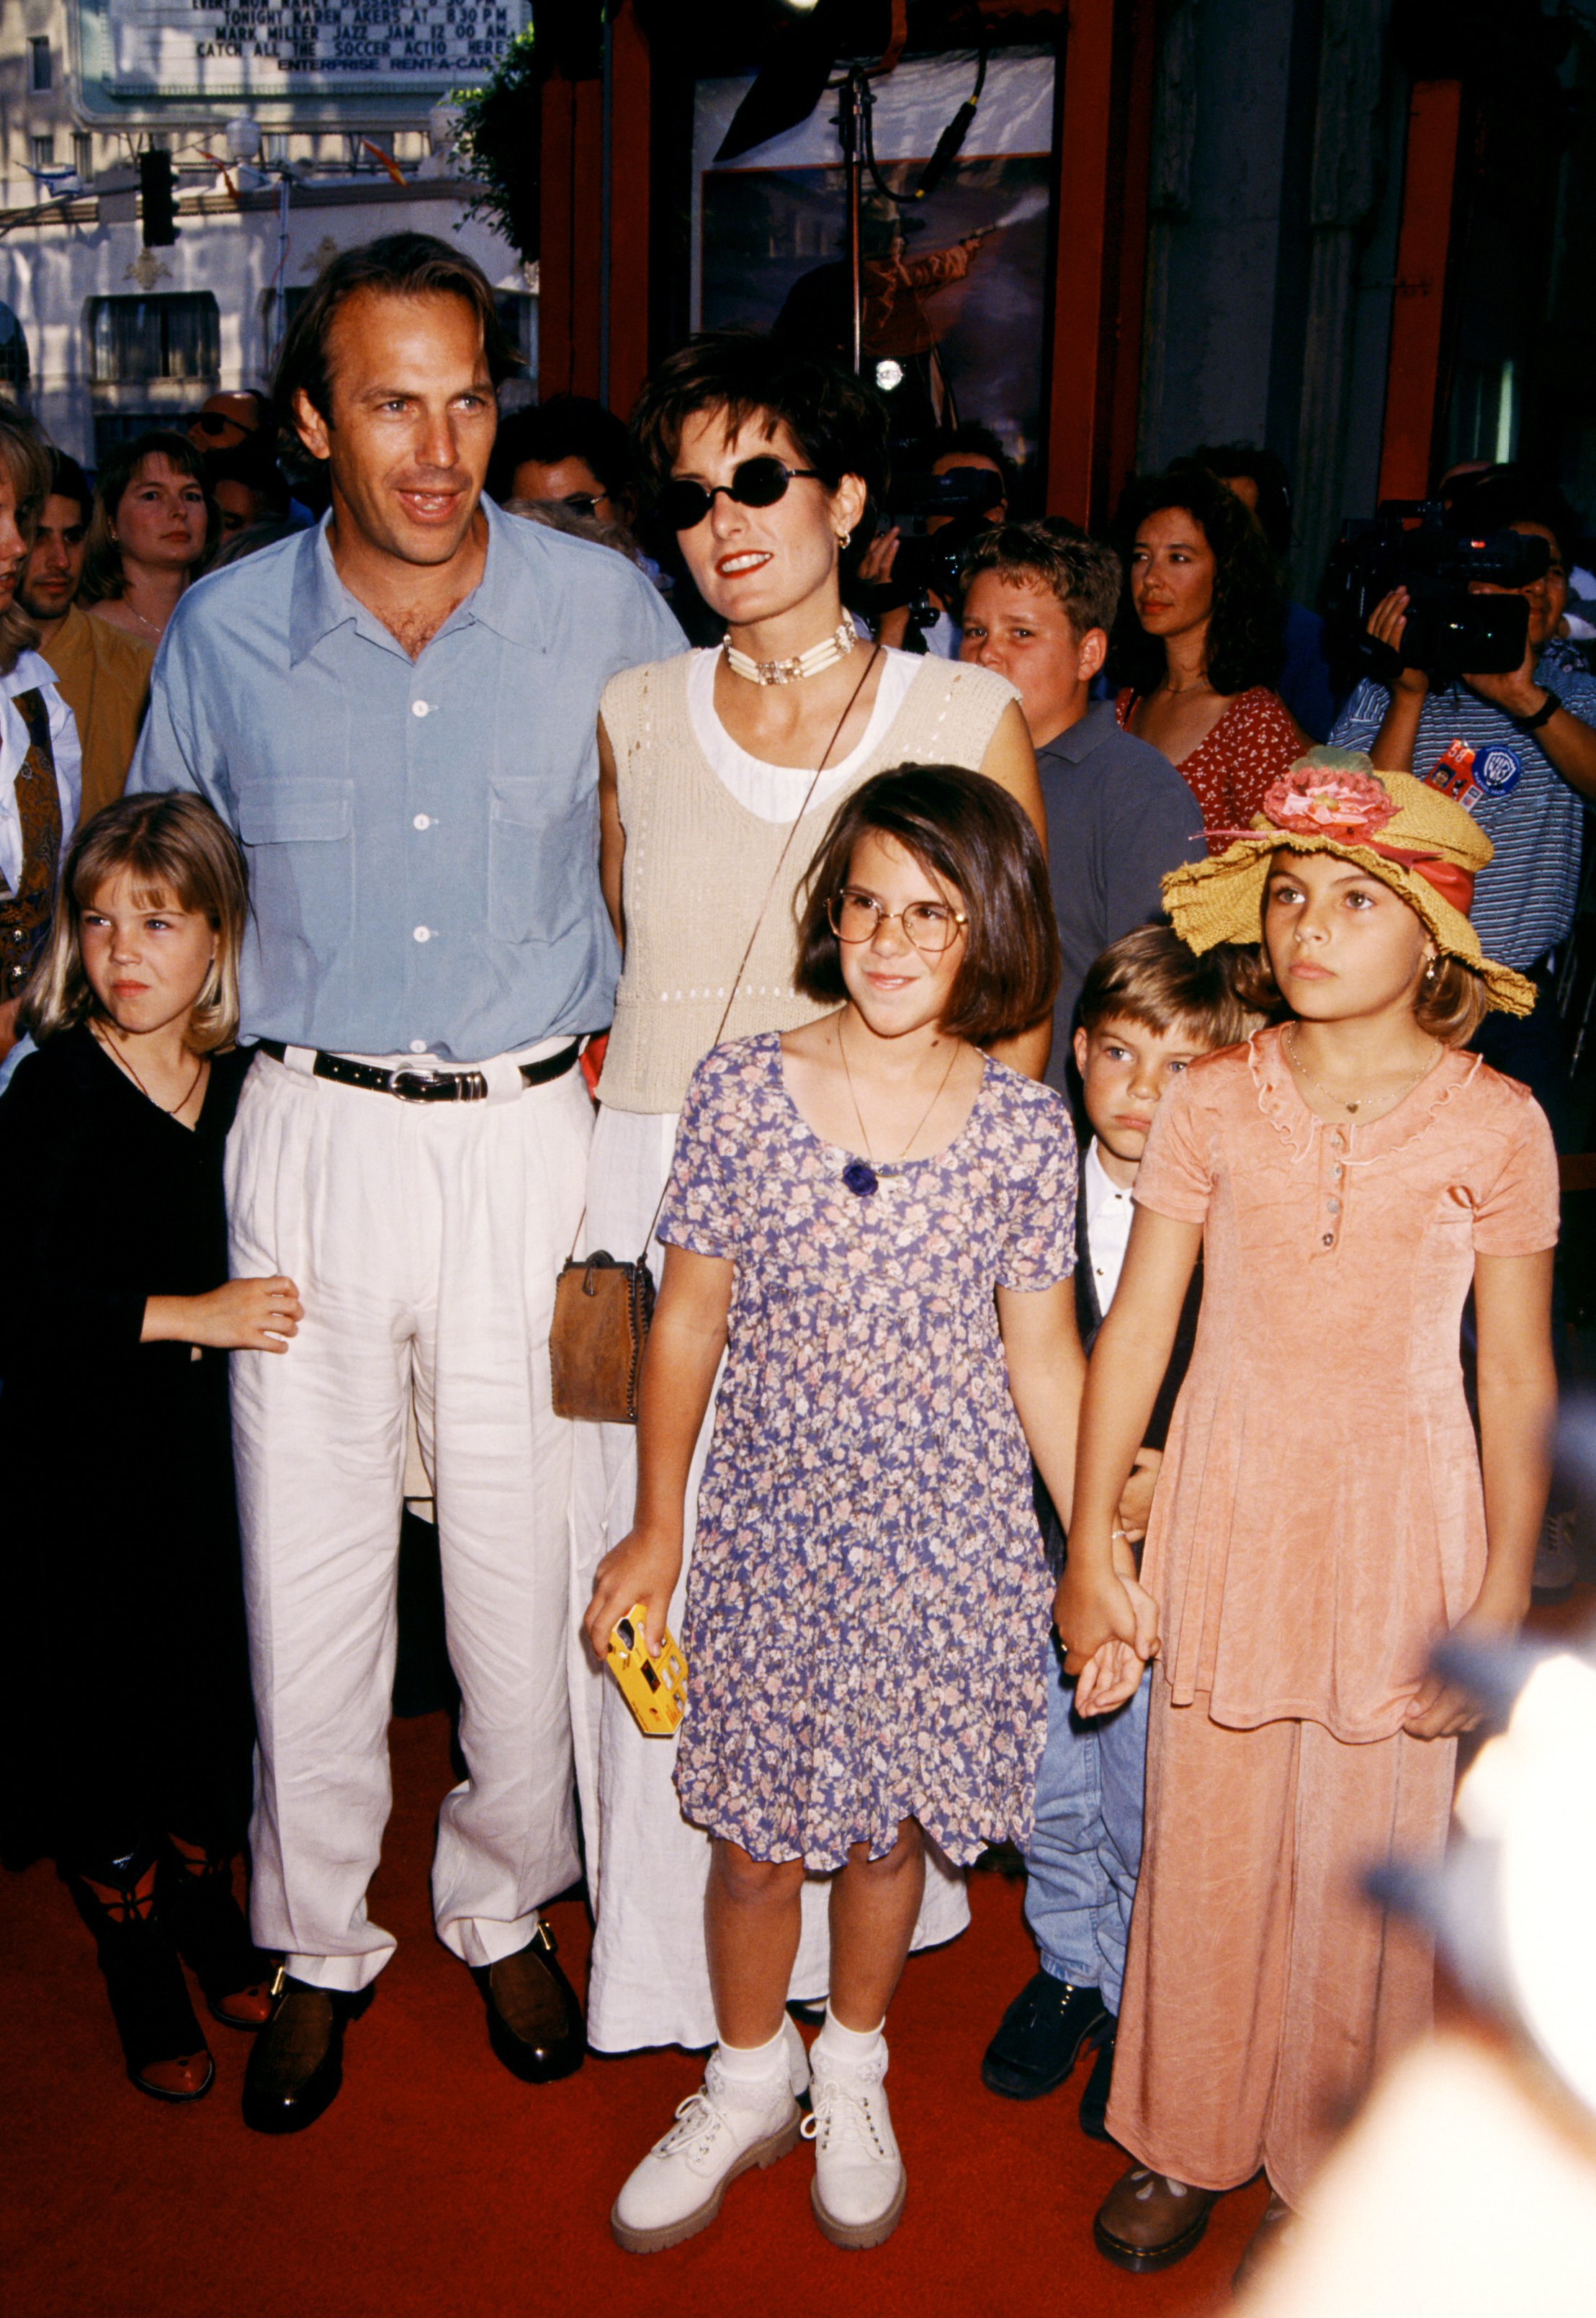 Actor Kevin Costner poses for a portrait with his ex-wife and children Cindy Costner, Annie, Lily and Joe arrive for the "Wyatt Earp" Hollywood Premiere on June 18, 1994 at the Mann's Chinese Theater in Hollywood, California. | Source: Getty Images